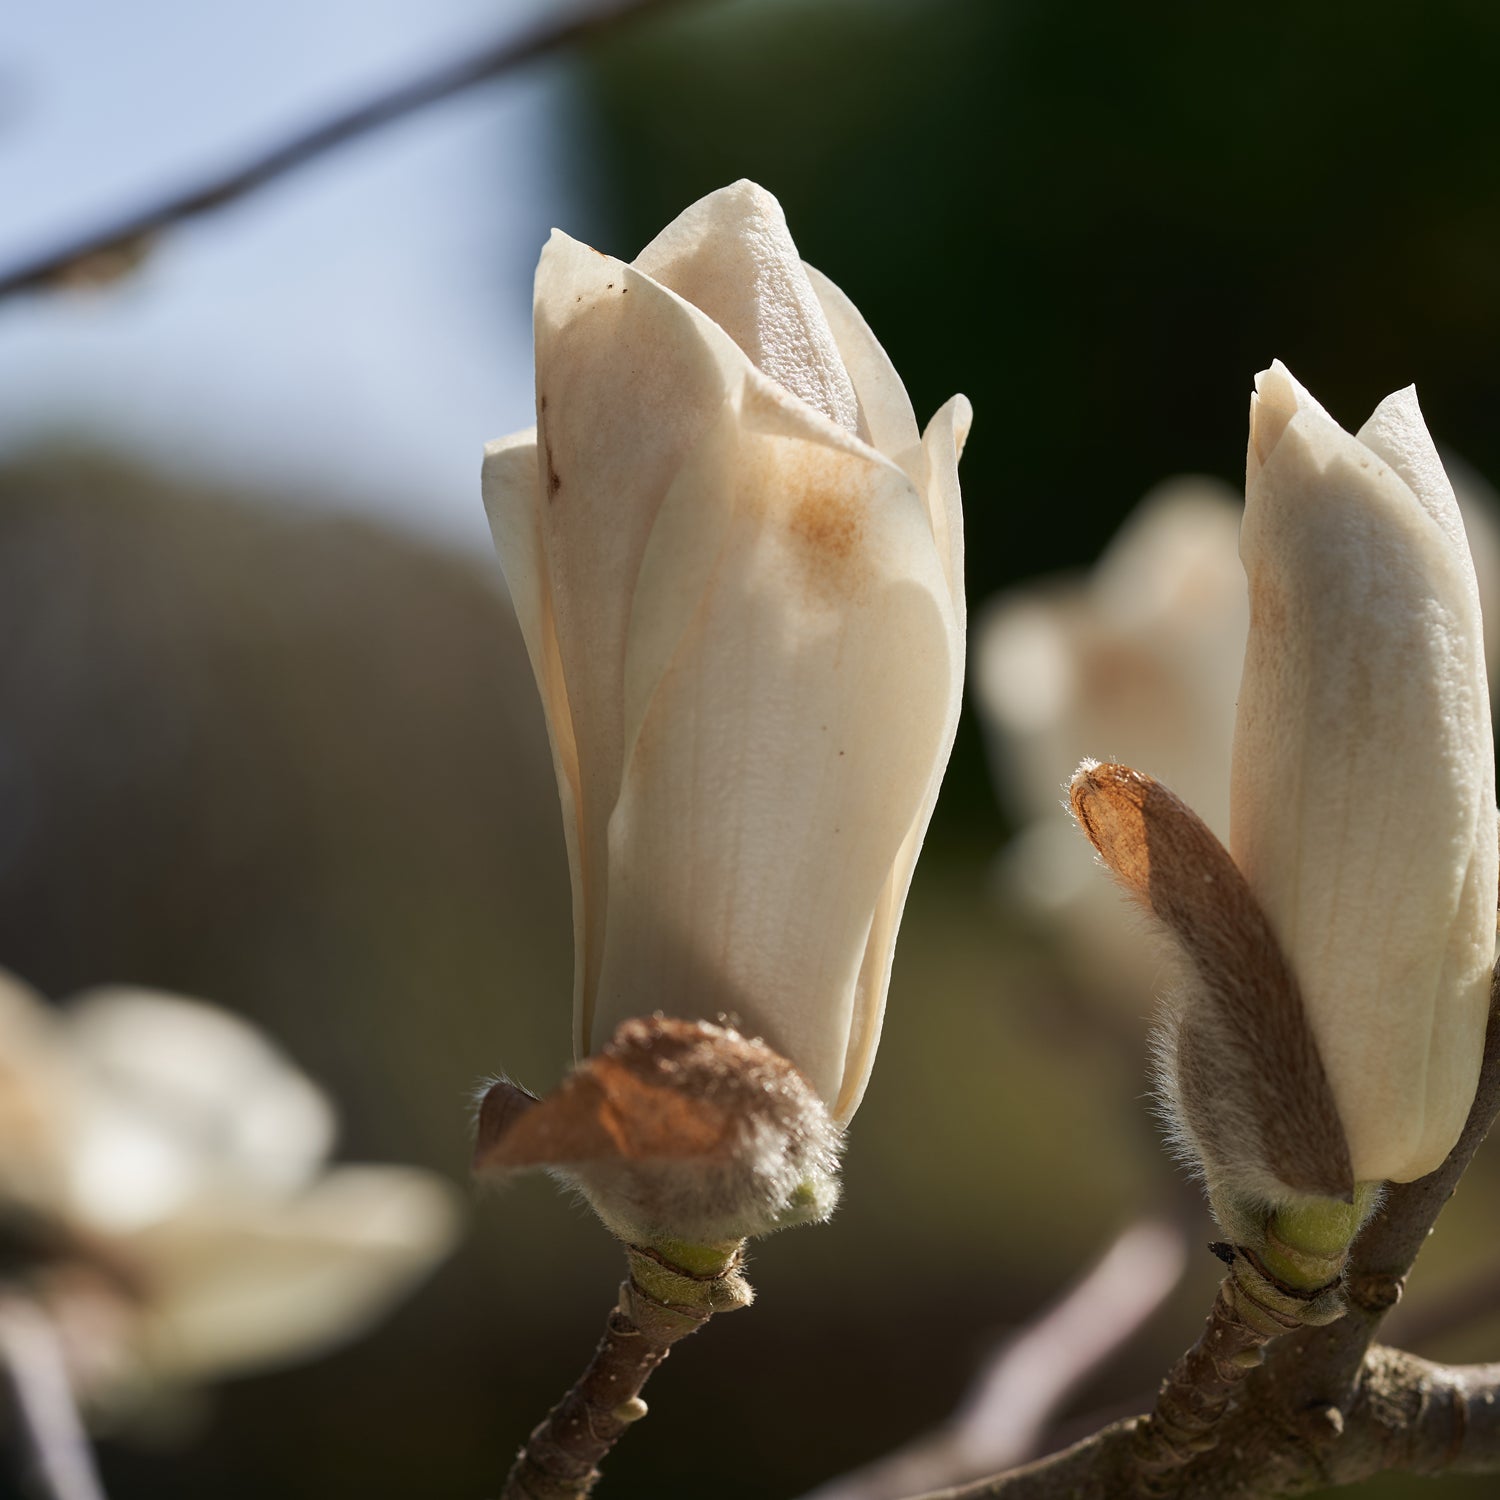 Lush magnolia plants in full bloom, showcasing the natural beauty that inspires our 'Magnolia' scented candle